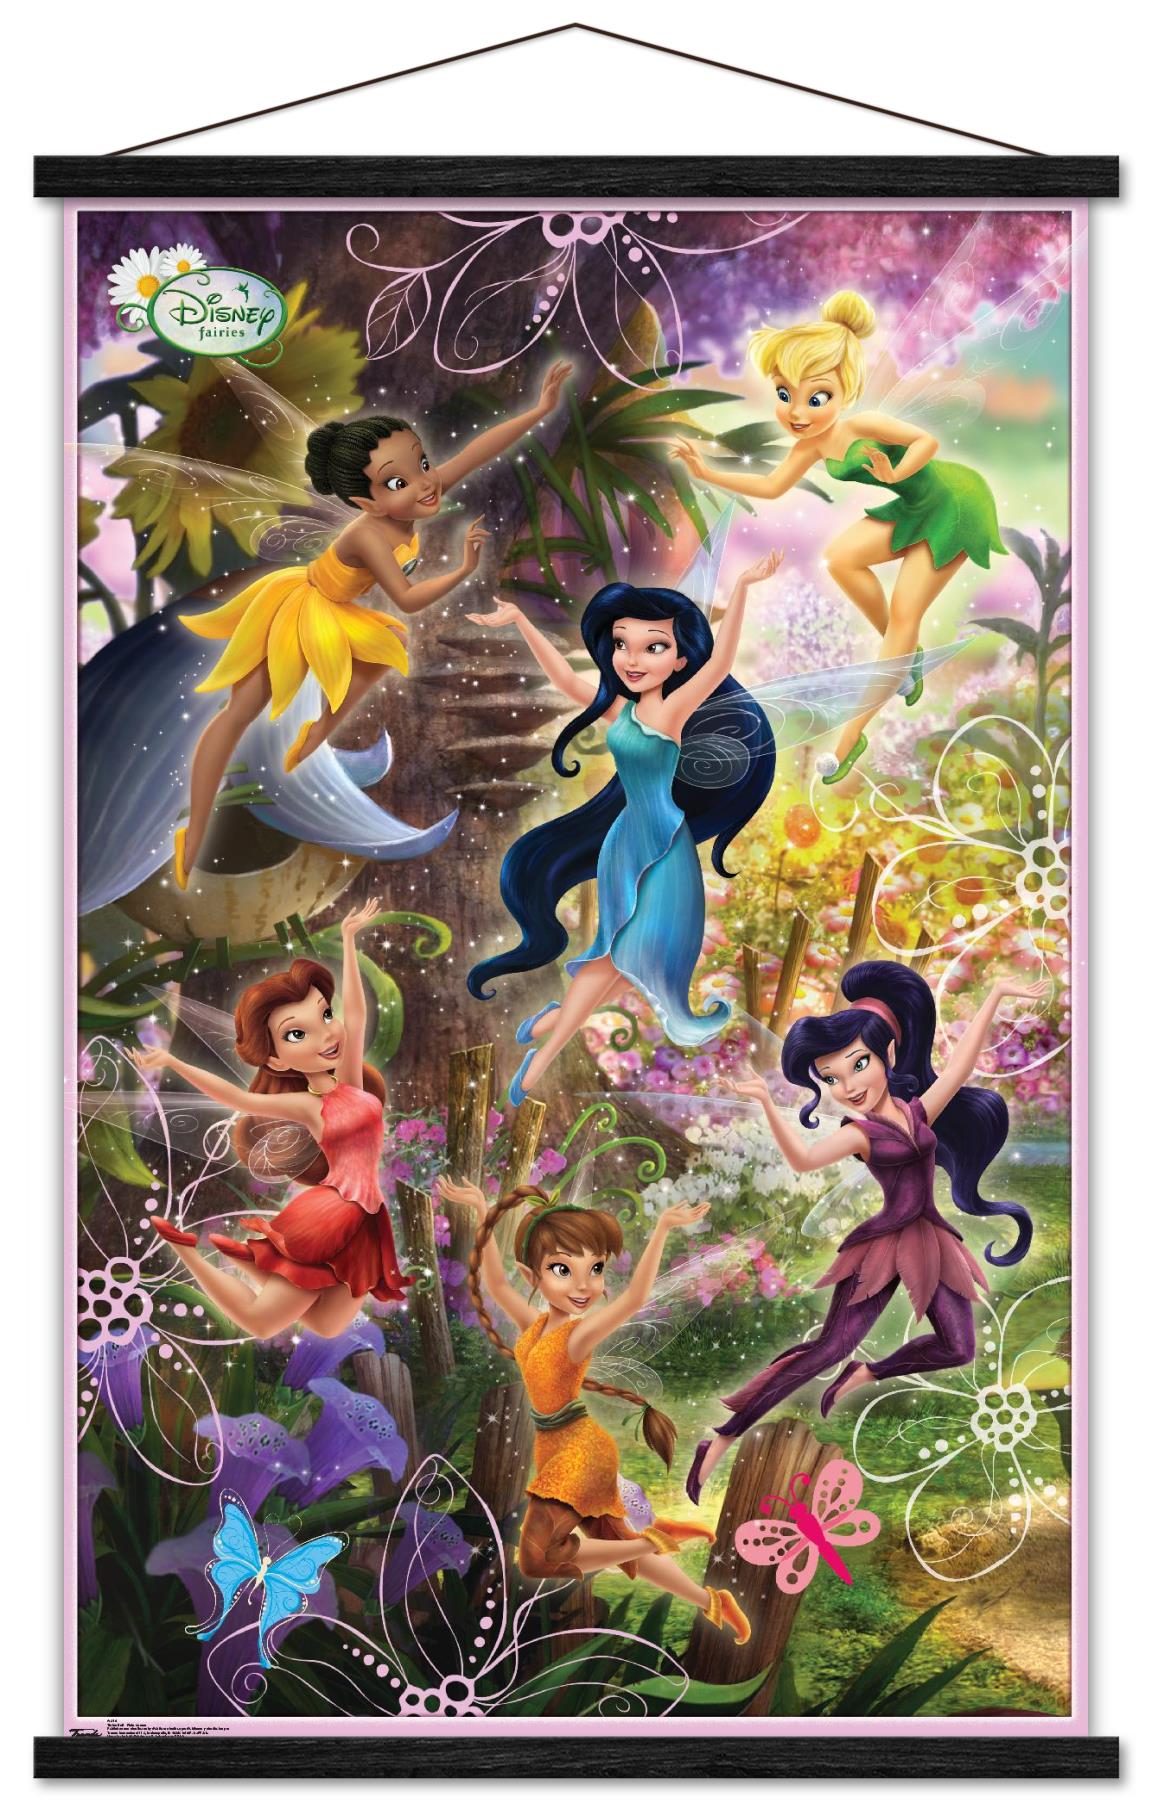 Tinkerbell For Cell Phones Wallpapers